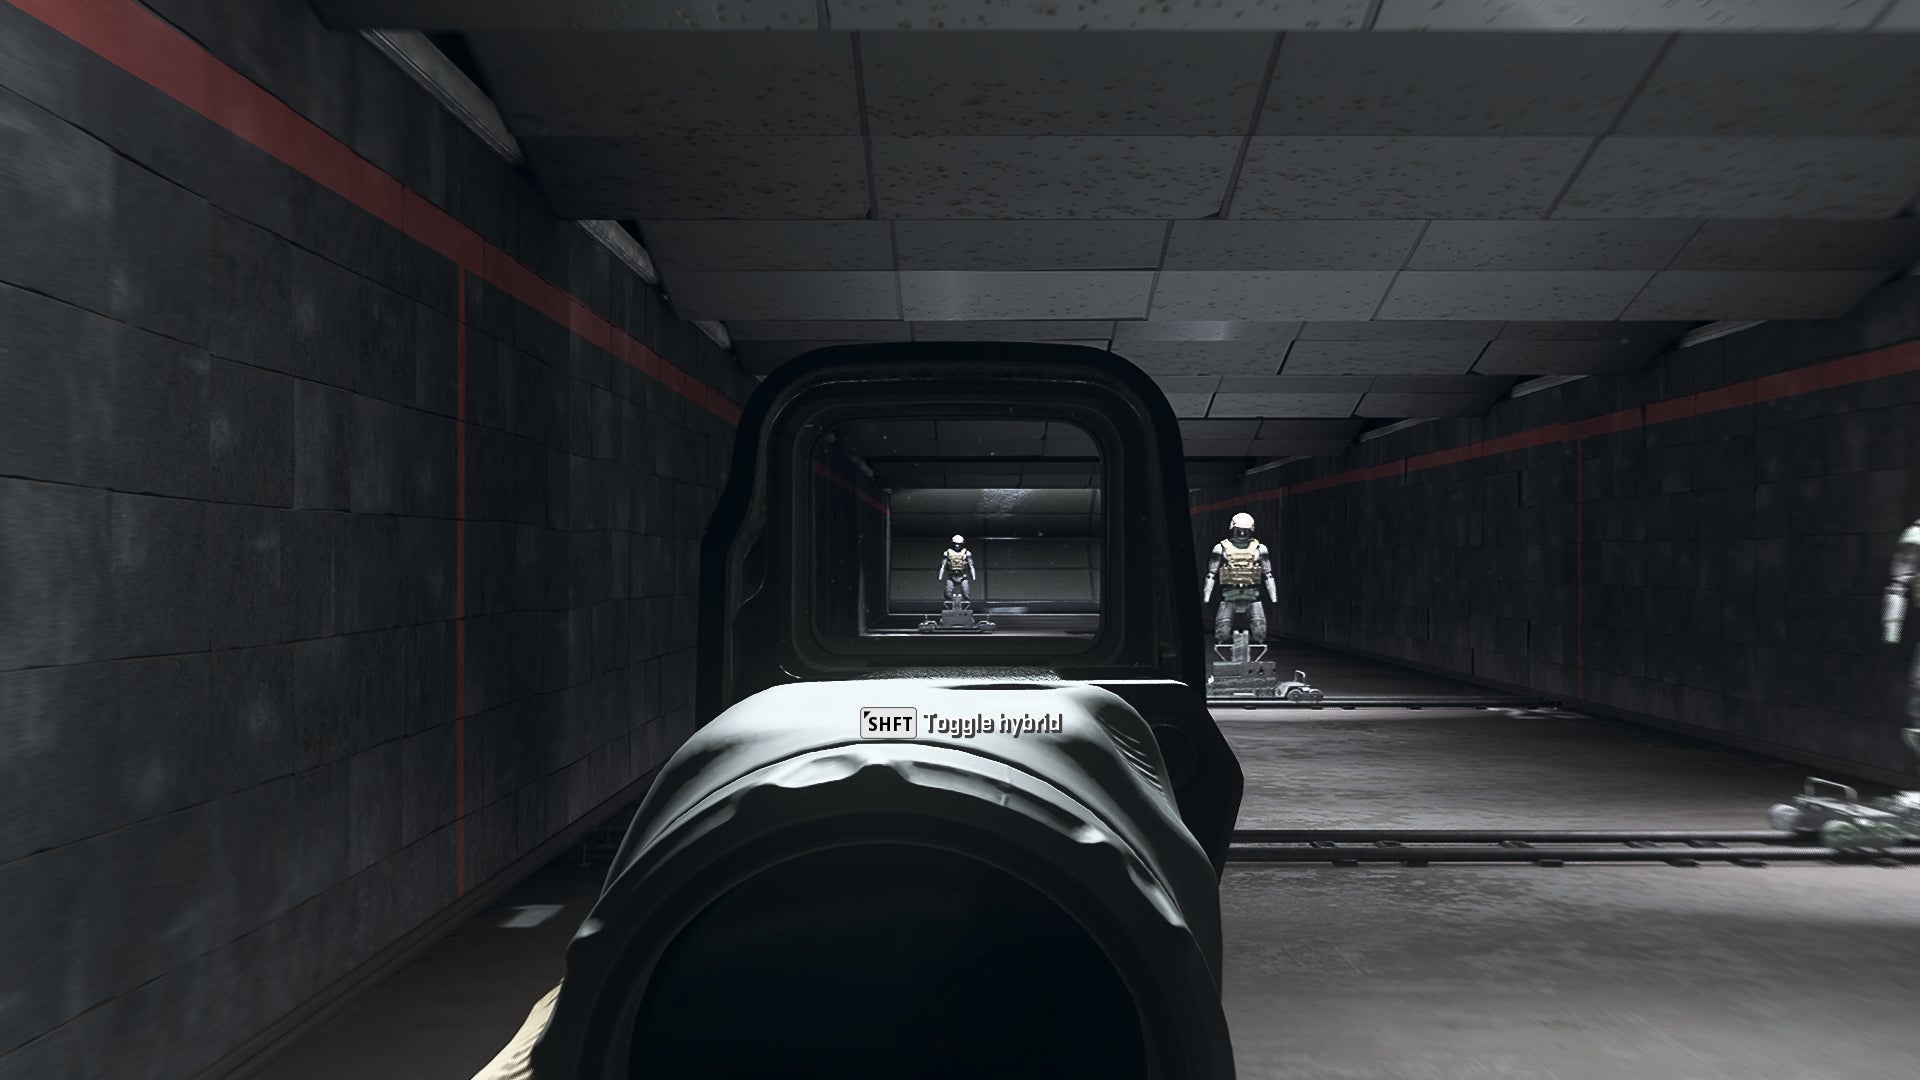 The player in Warzone 2.0 aims at a training dummy using the SZ Vortex 90 optic attachment.